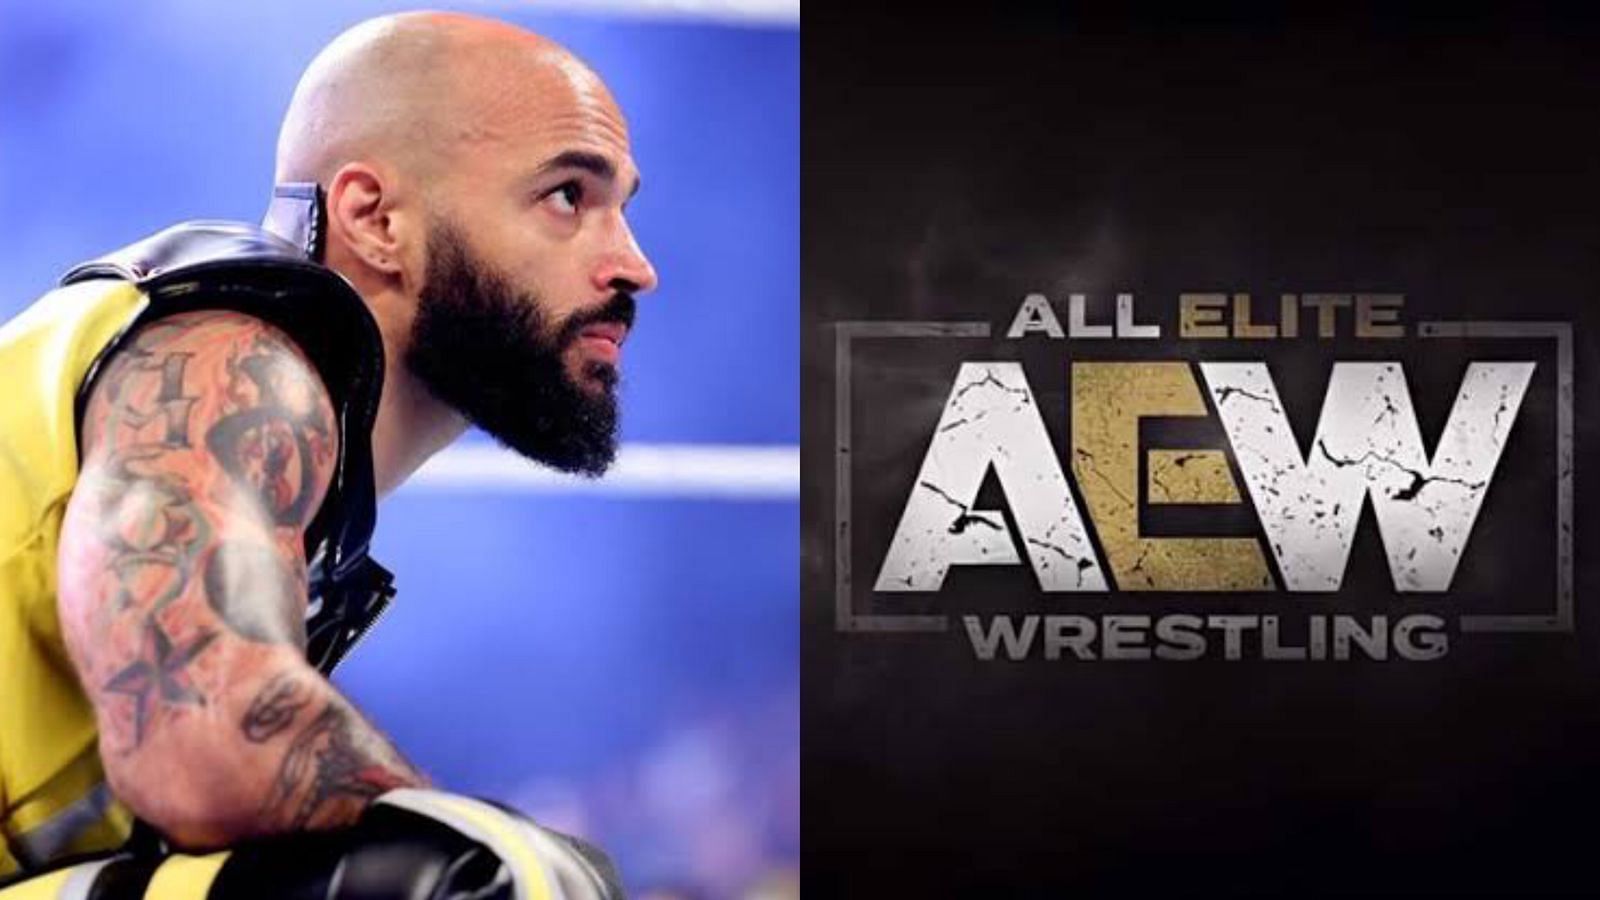 Ricochet is a former WWE United States and Intercontinental Champion